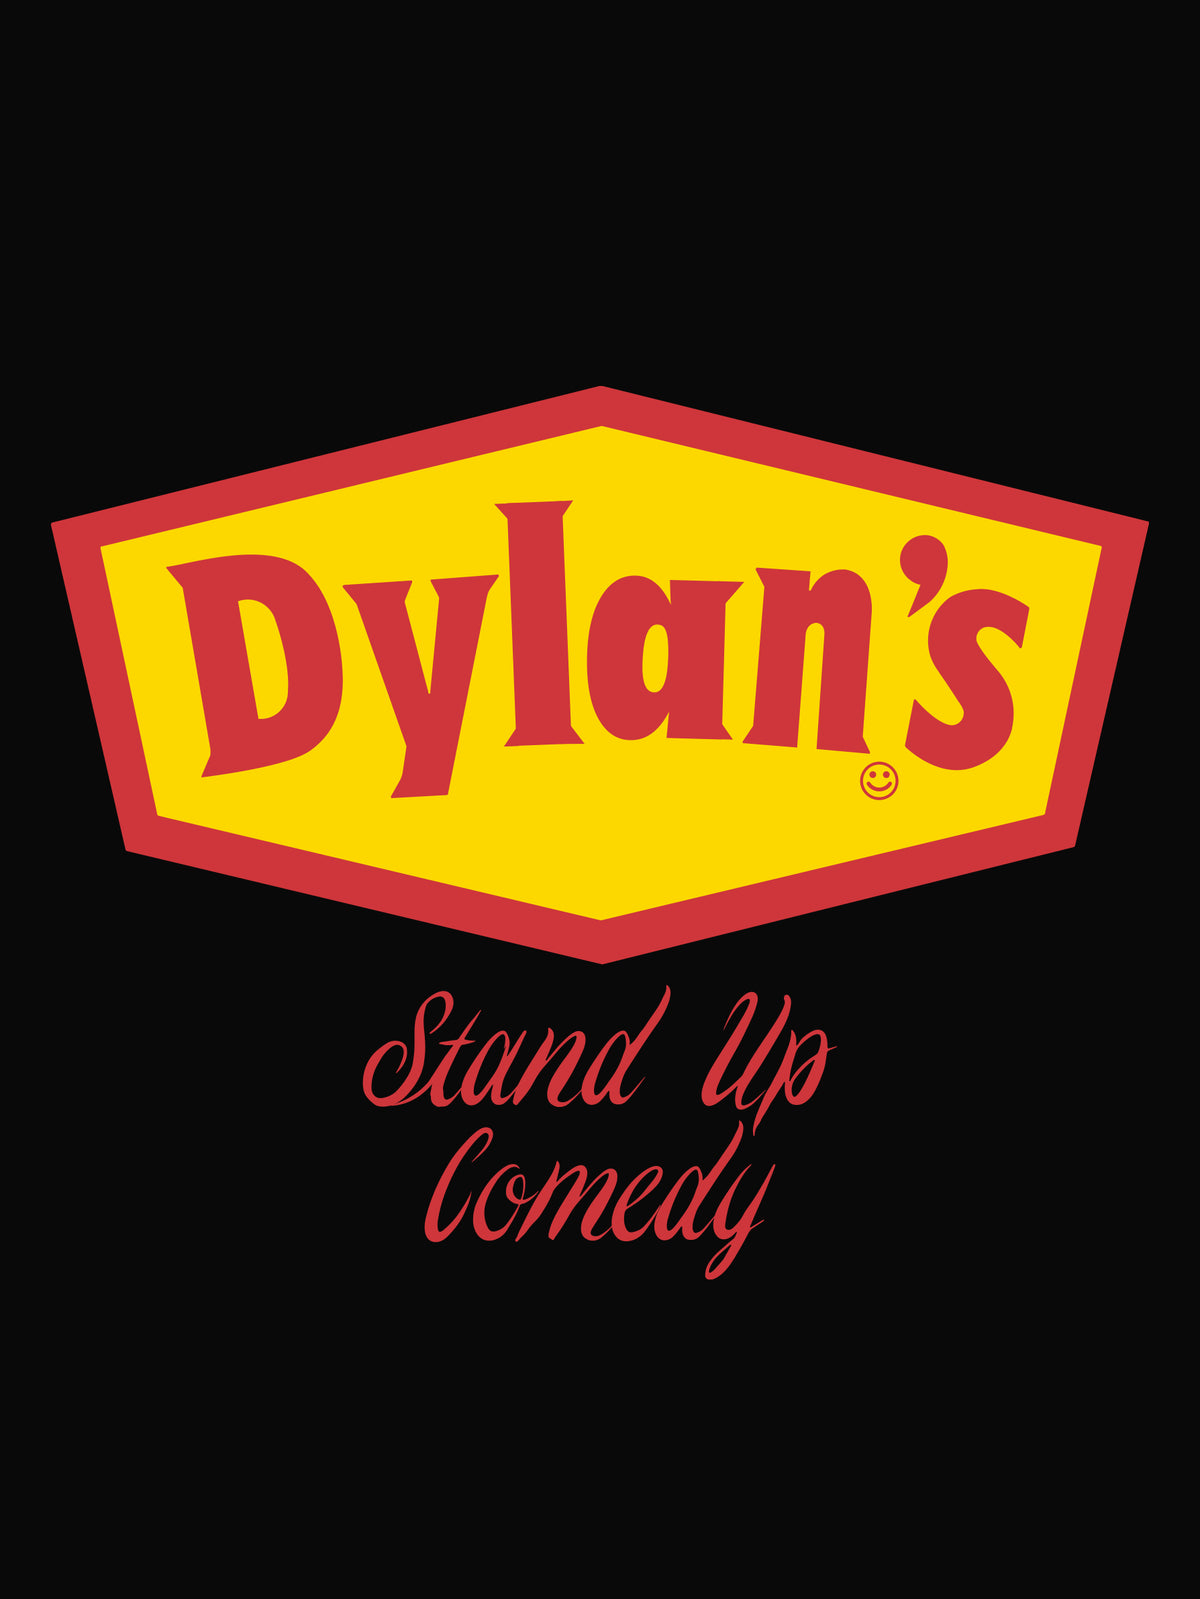 Dylan's by Dylan Sullivan